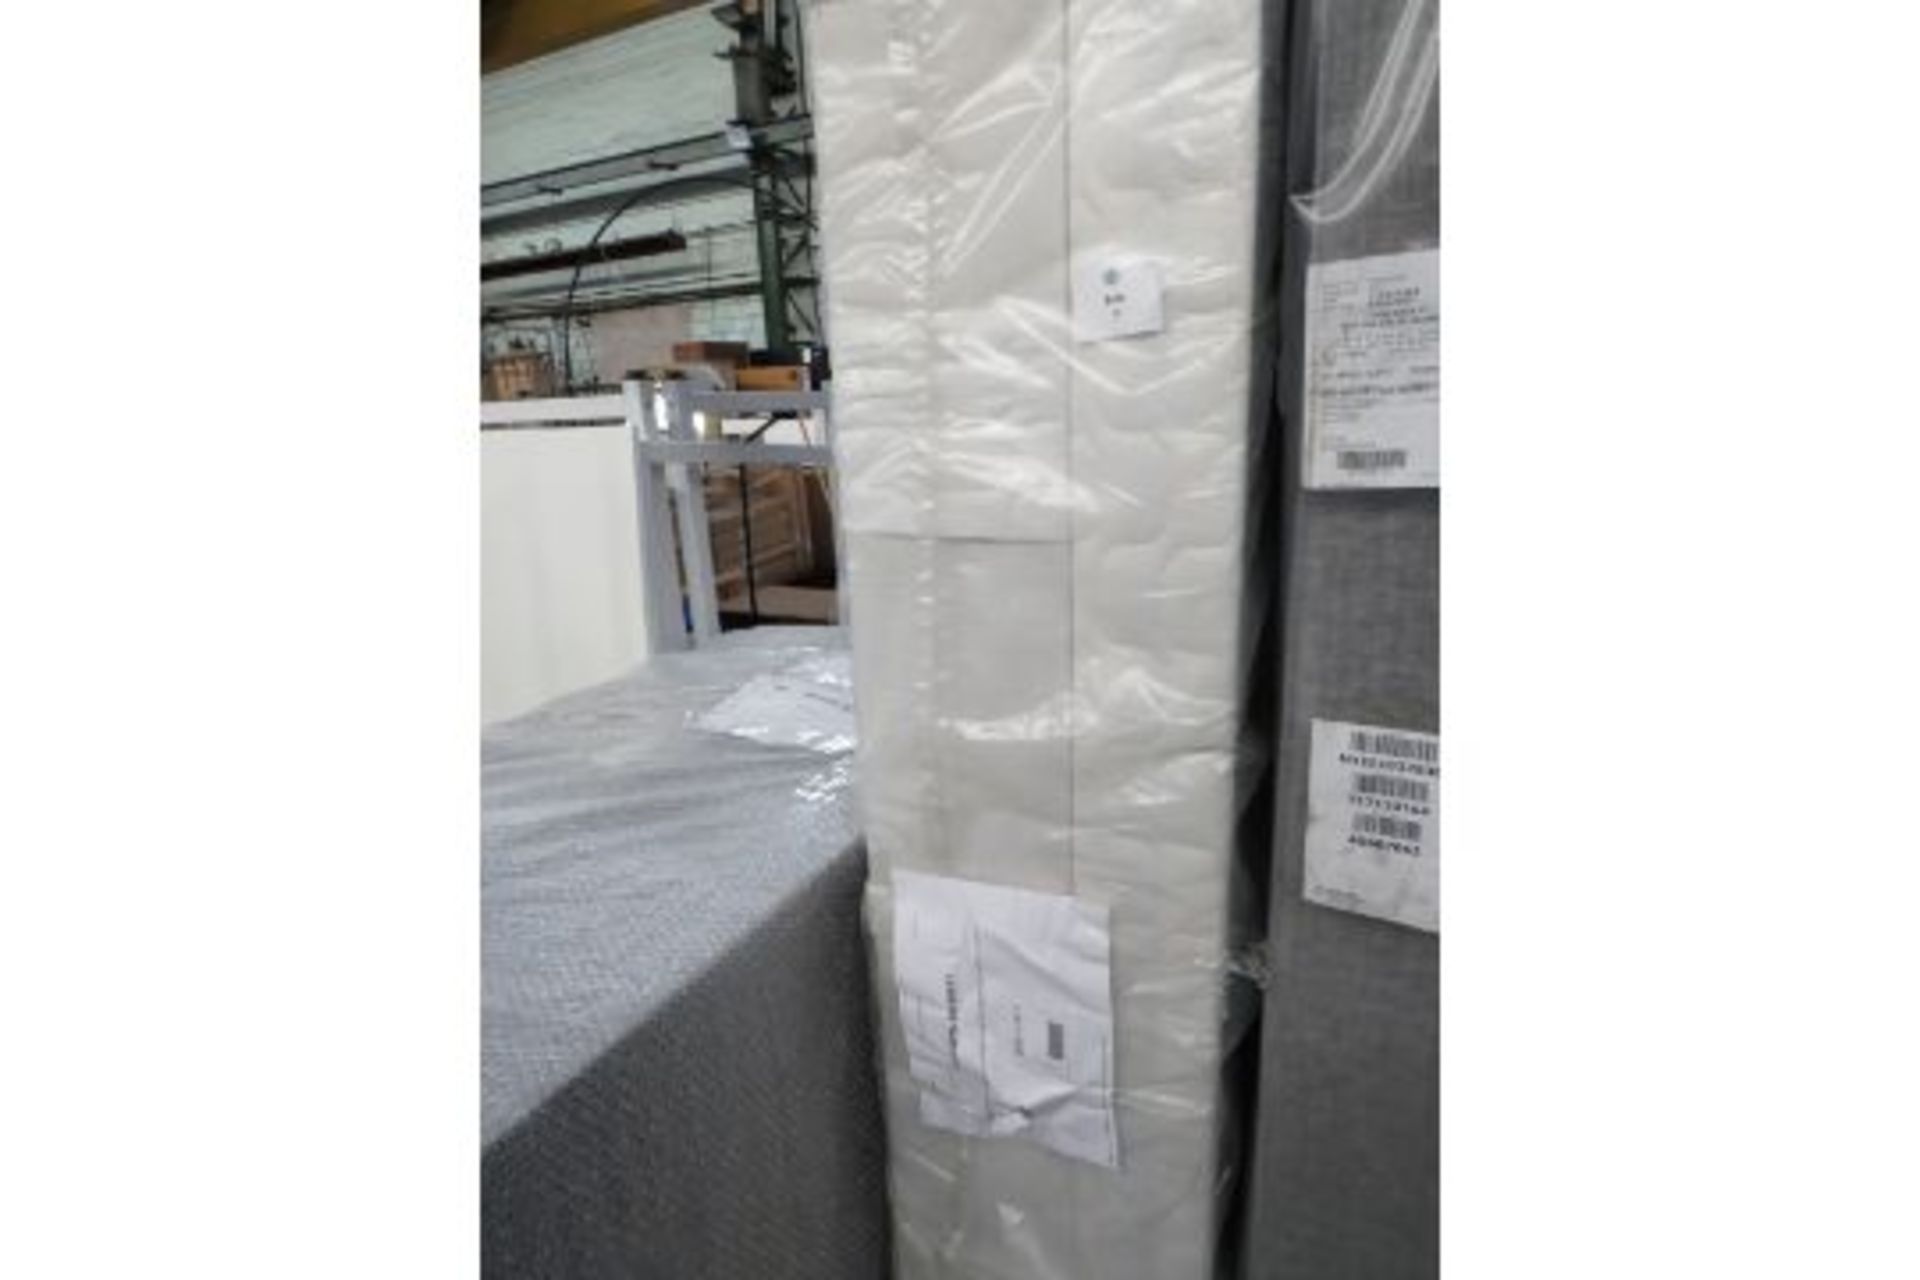 Silentnight Miracoil Quilted Divan 90cm Single RRP £339.00 This item looks to be in good condition